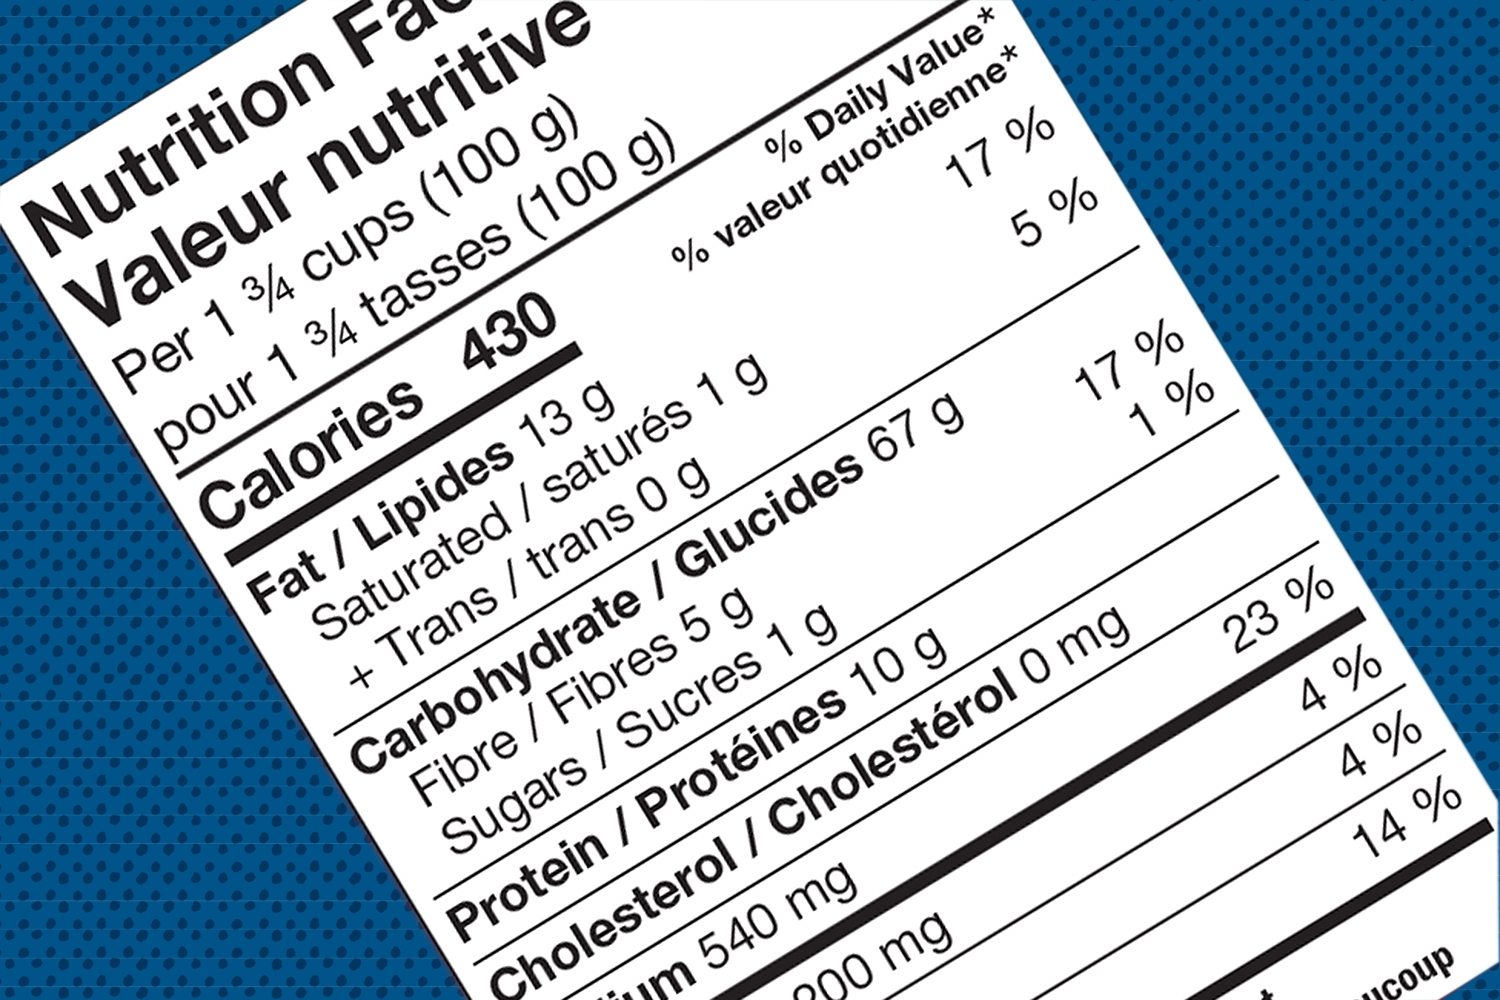 USA Canada - 2016 Changes Food Labeling Regulations